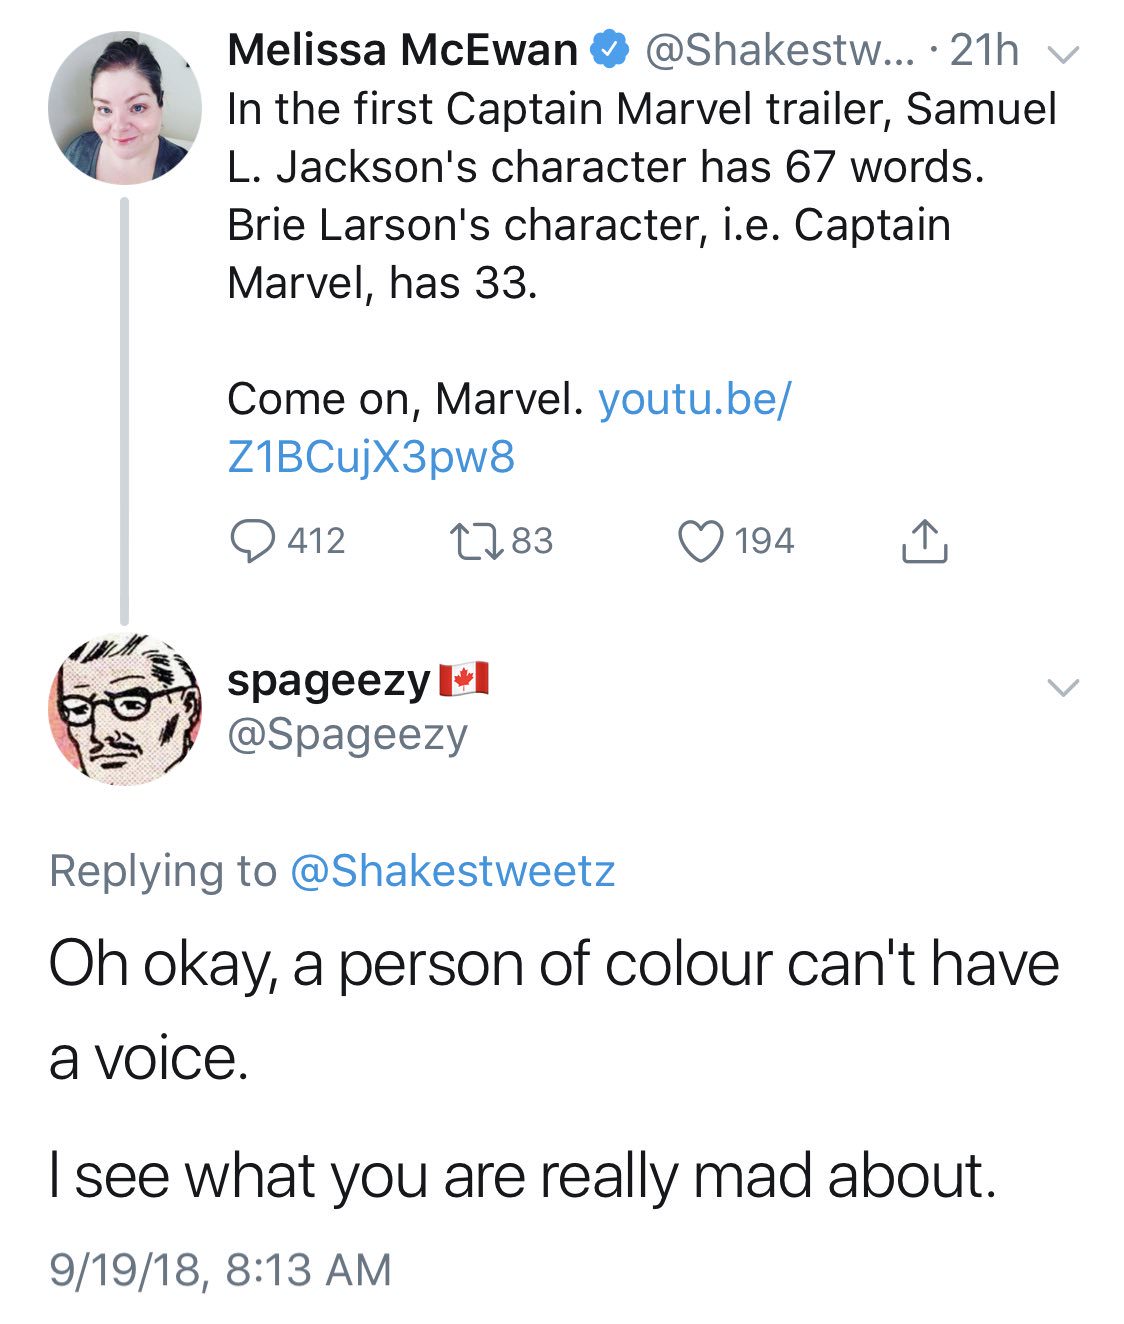 Melissa McEwan ... 21h v In the first Captain Marvel trailer, Samuel L. Jackson's character has 67 words. Brie Larson's character, i.e. Captain Marvel, has 33. Come on, Marvel. youtu.be Z1BCujX3pw8 9 412 2283 194 spageezy Oh okay, a person of colour can't